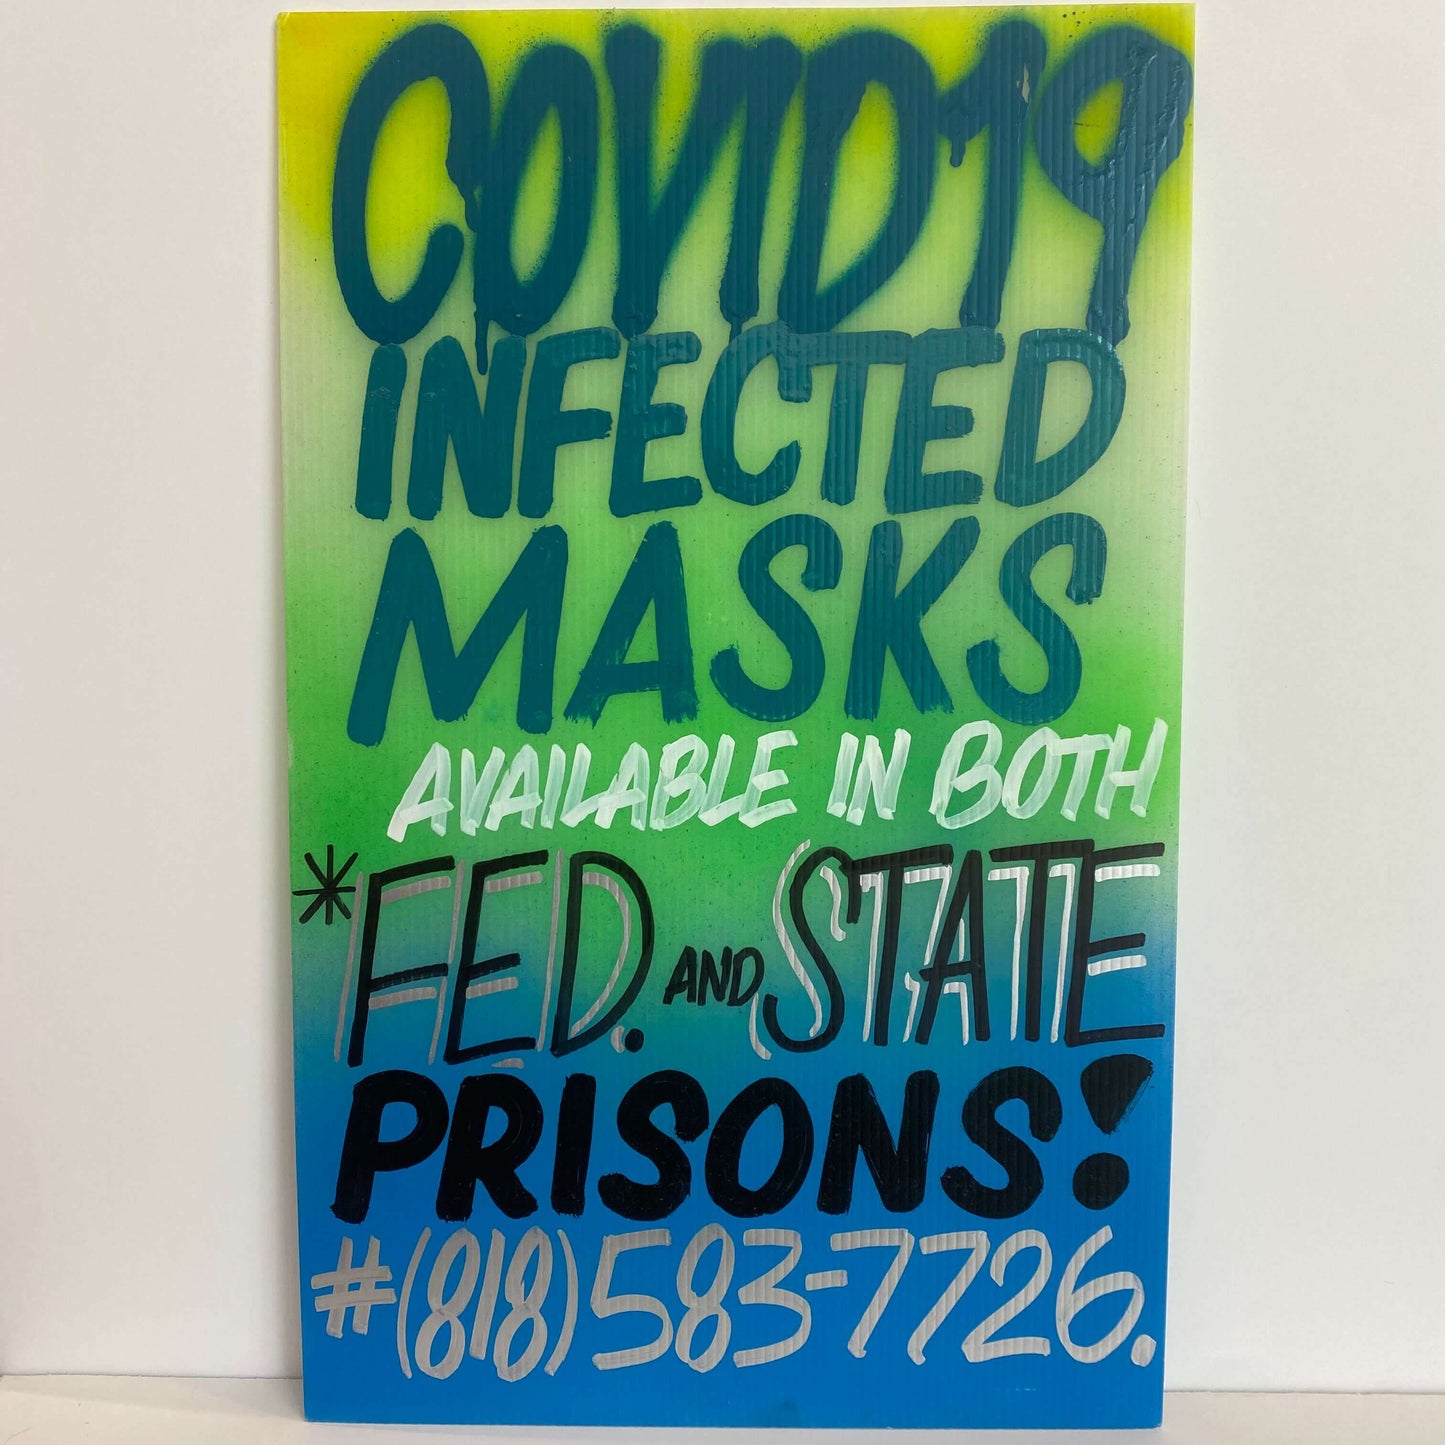 CASH4 'Covid Infected Masks'